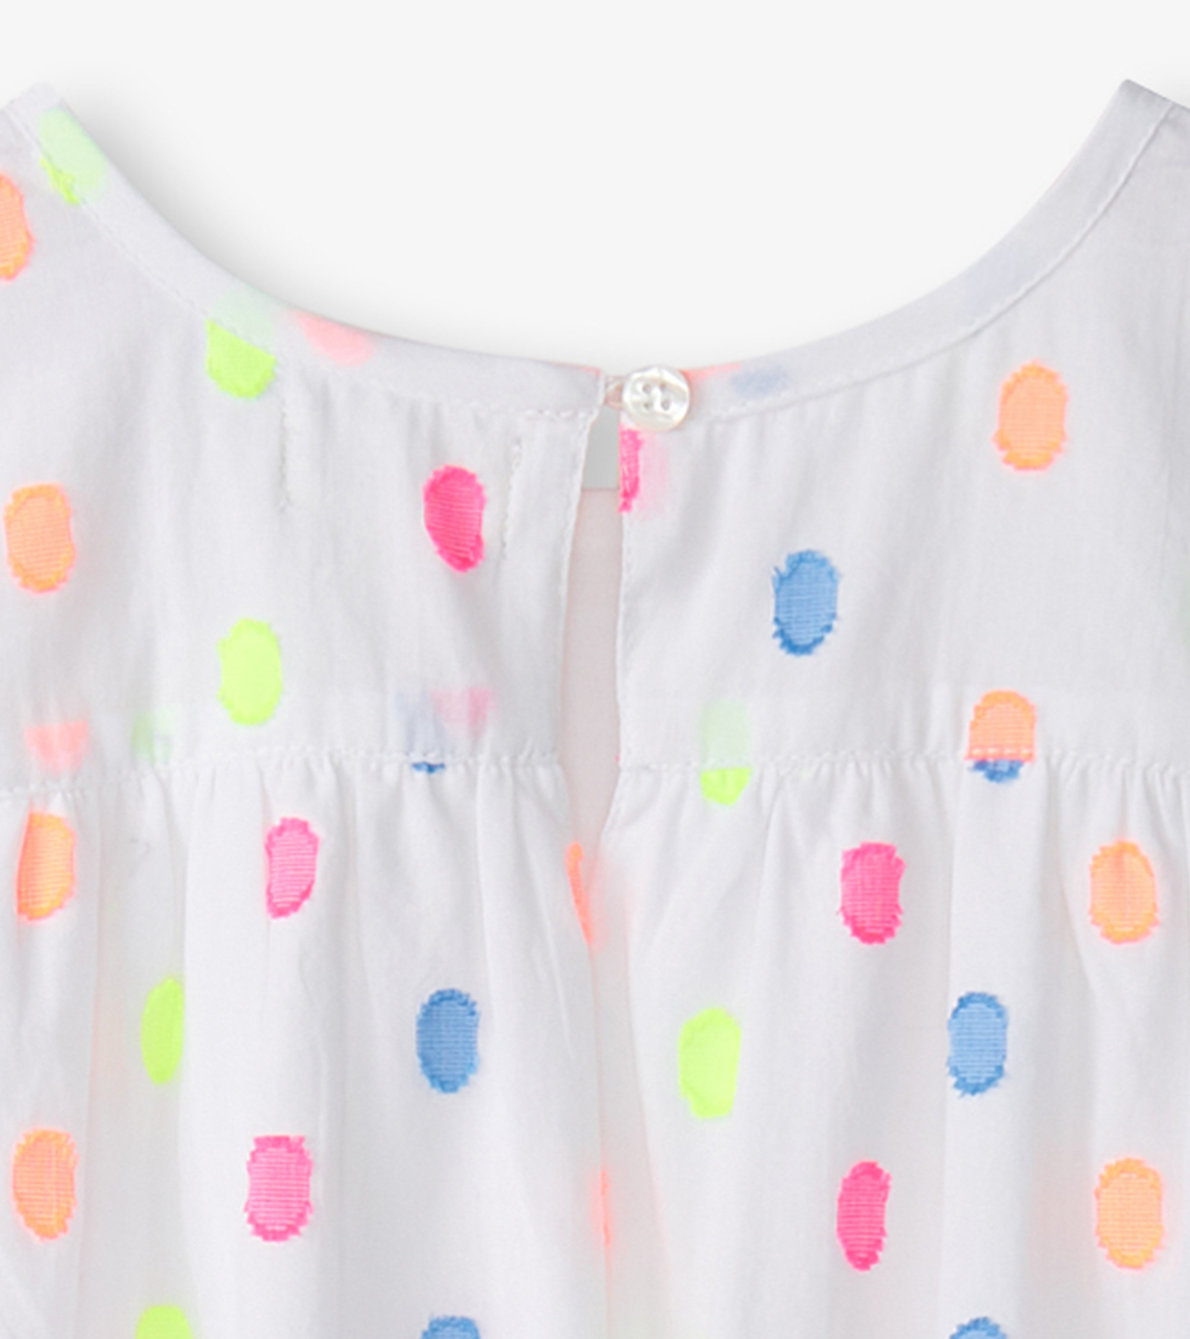 View larger image of Girls Summer Dots Woven Play Dress